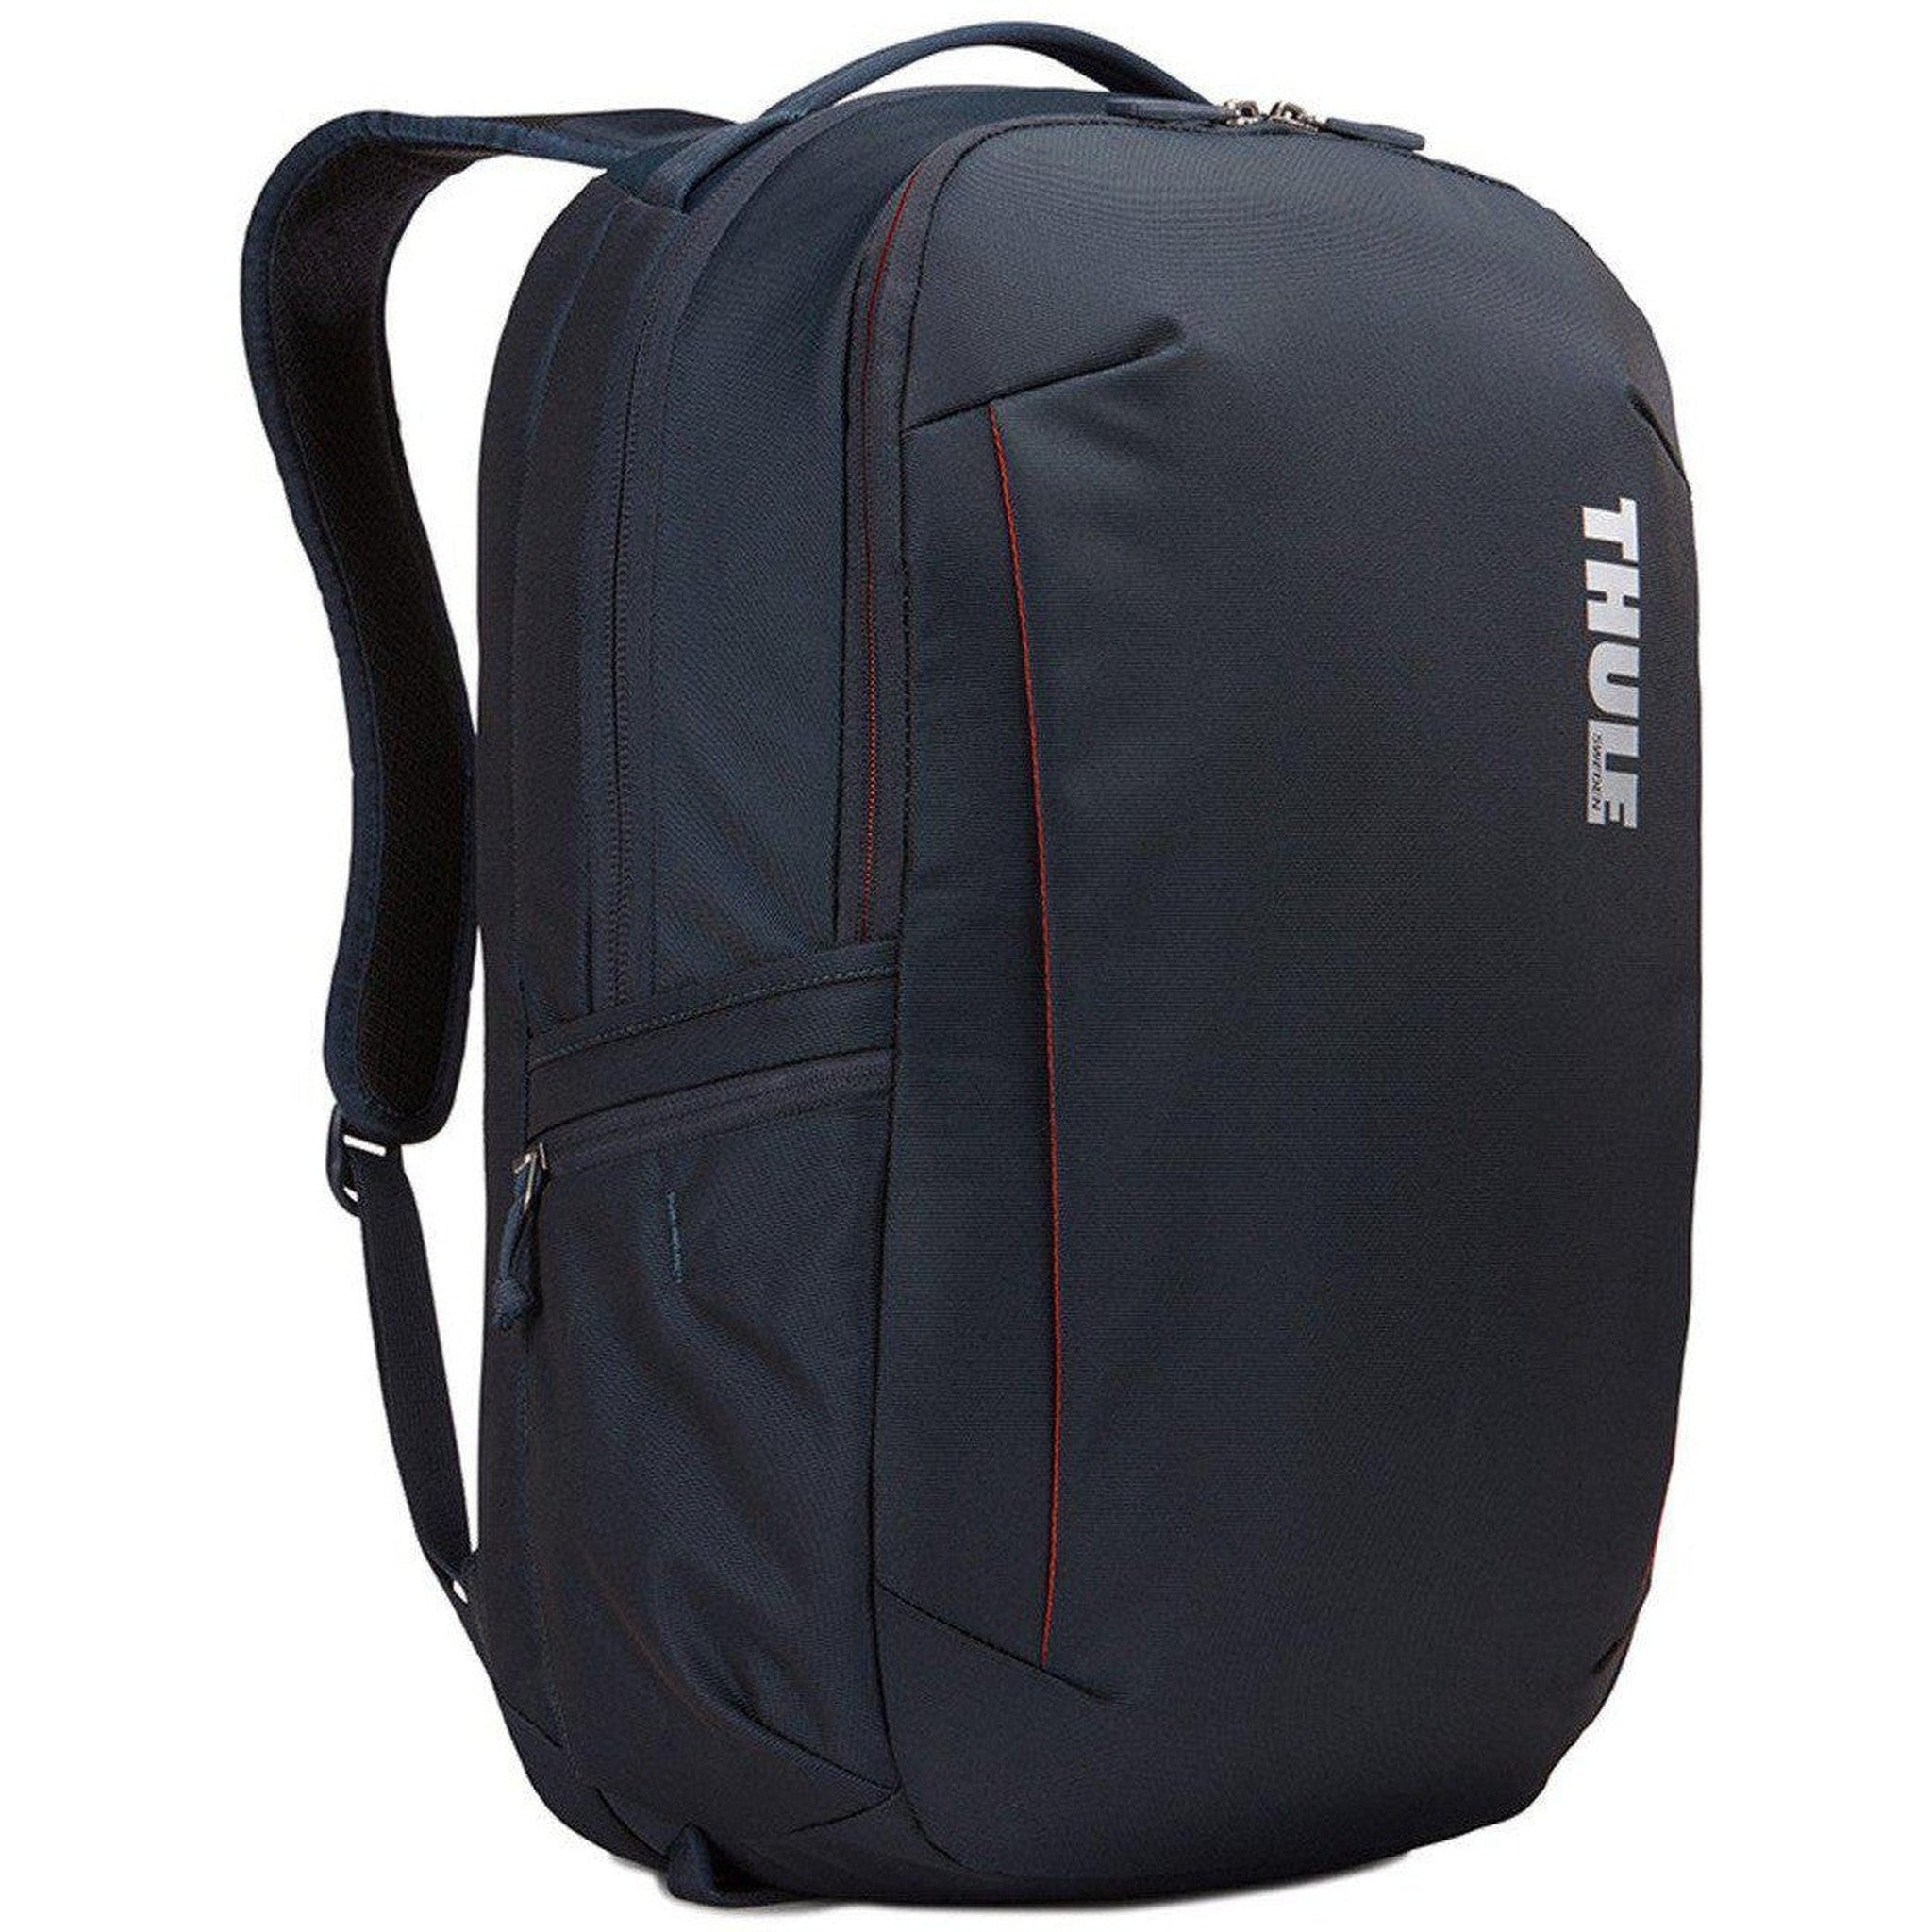 Thule Luggage Subterra 30L Backpack – Luggage Pros